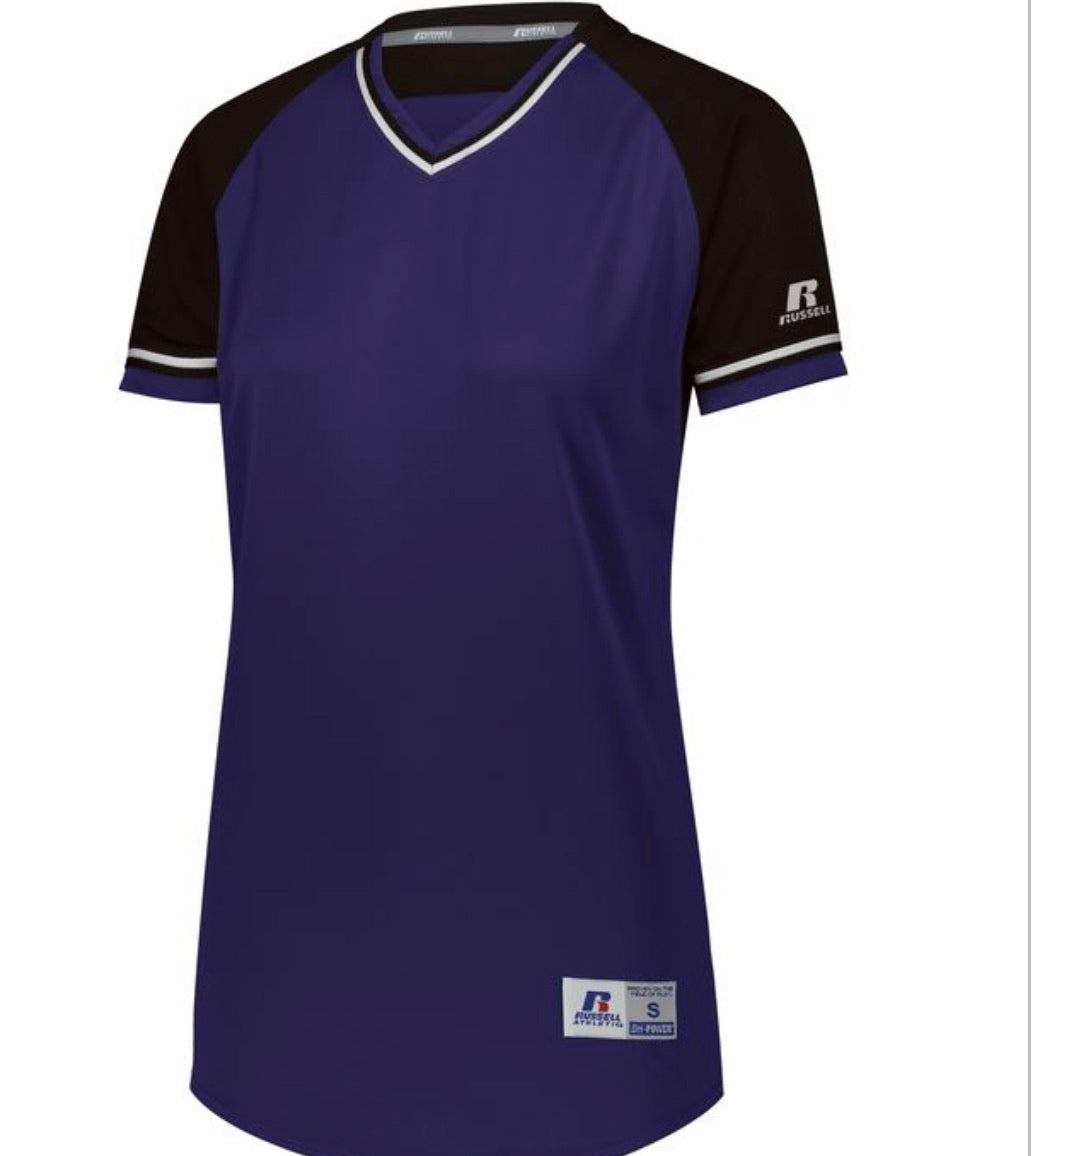 Russell Classic FP Jersey - Retro Women's Fastpitch